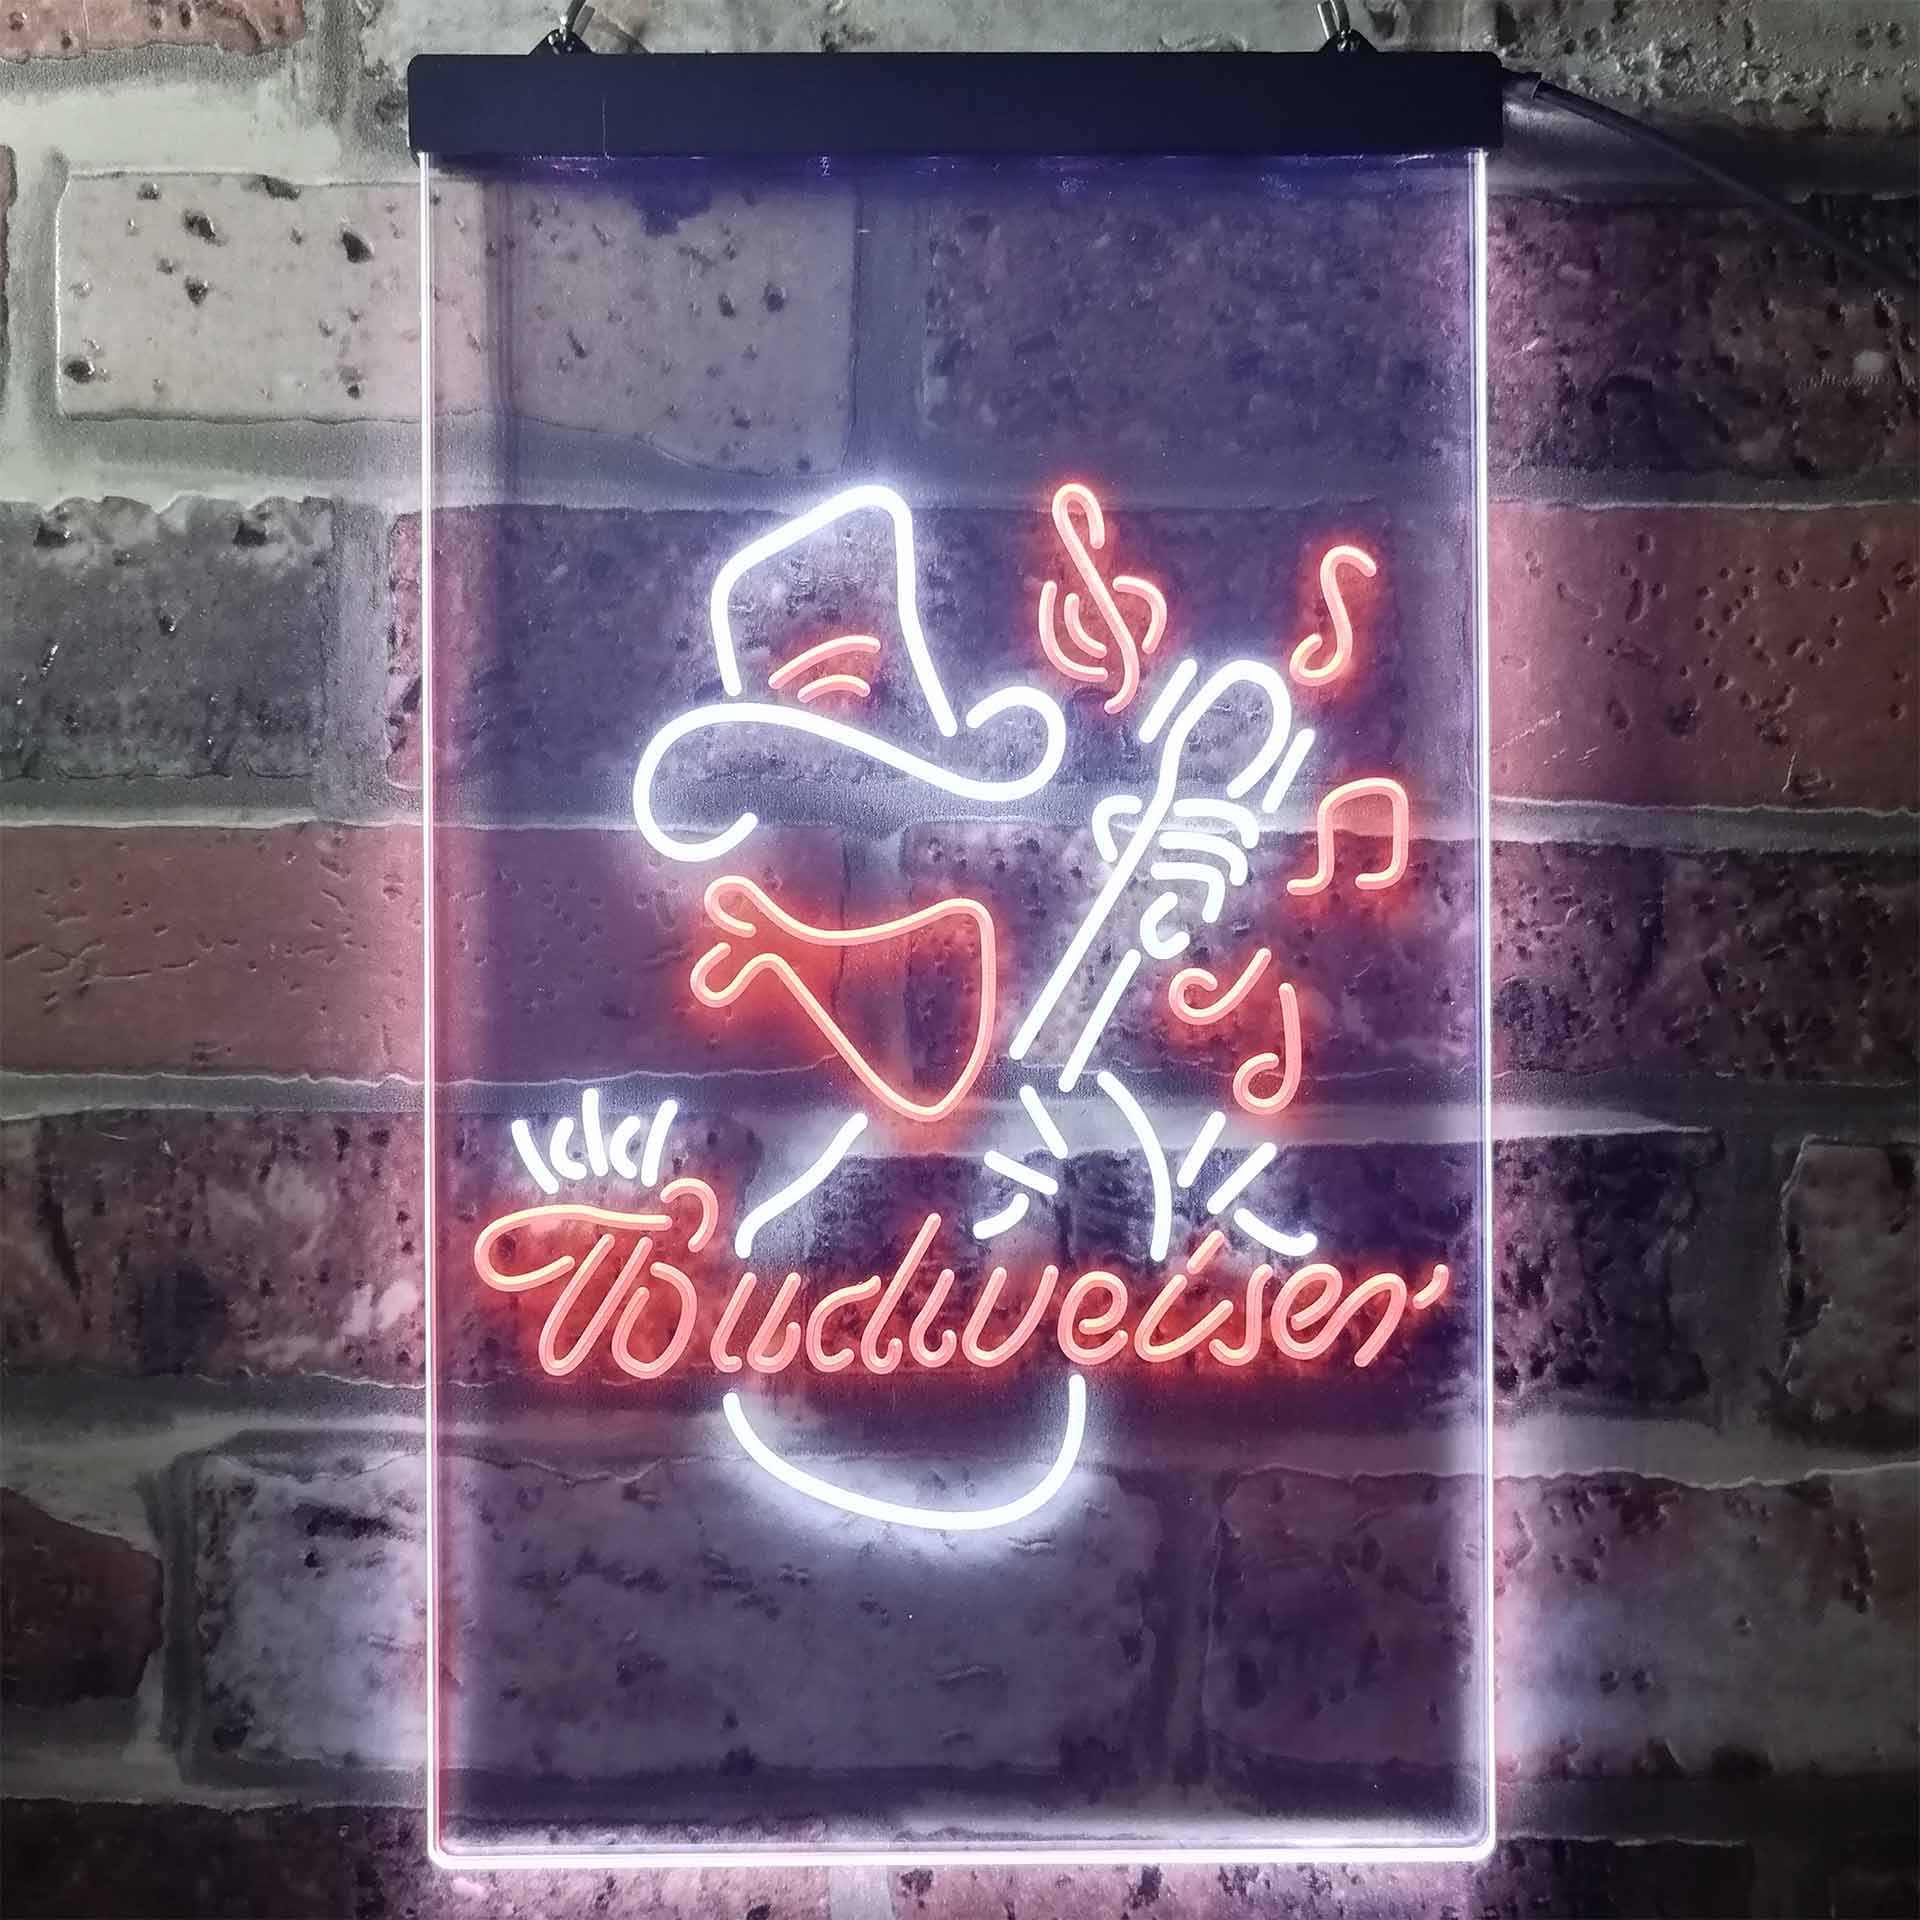 Budweiser Cowboy Play Guitar Dual Color LED Neon Sign ProLedSign